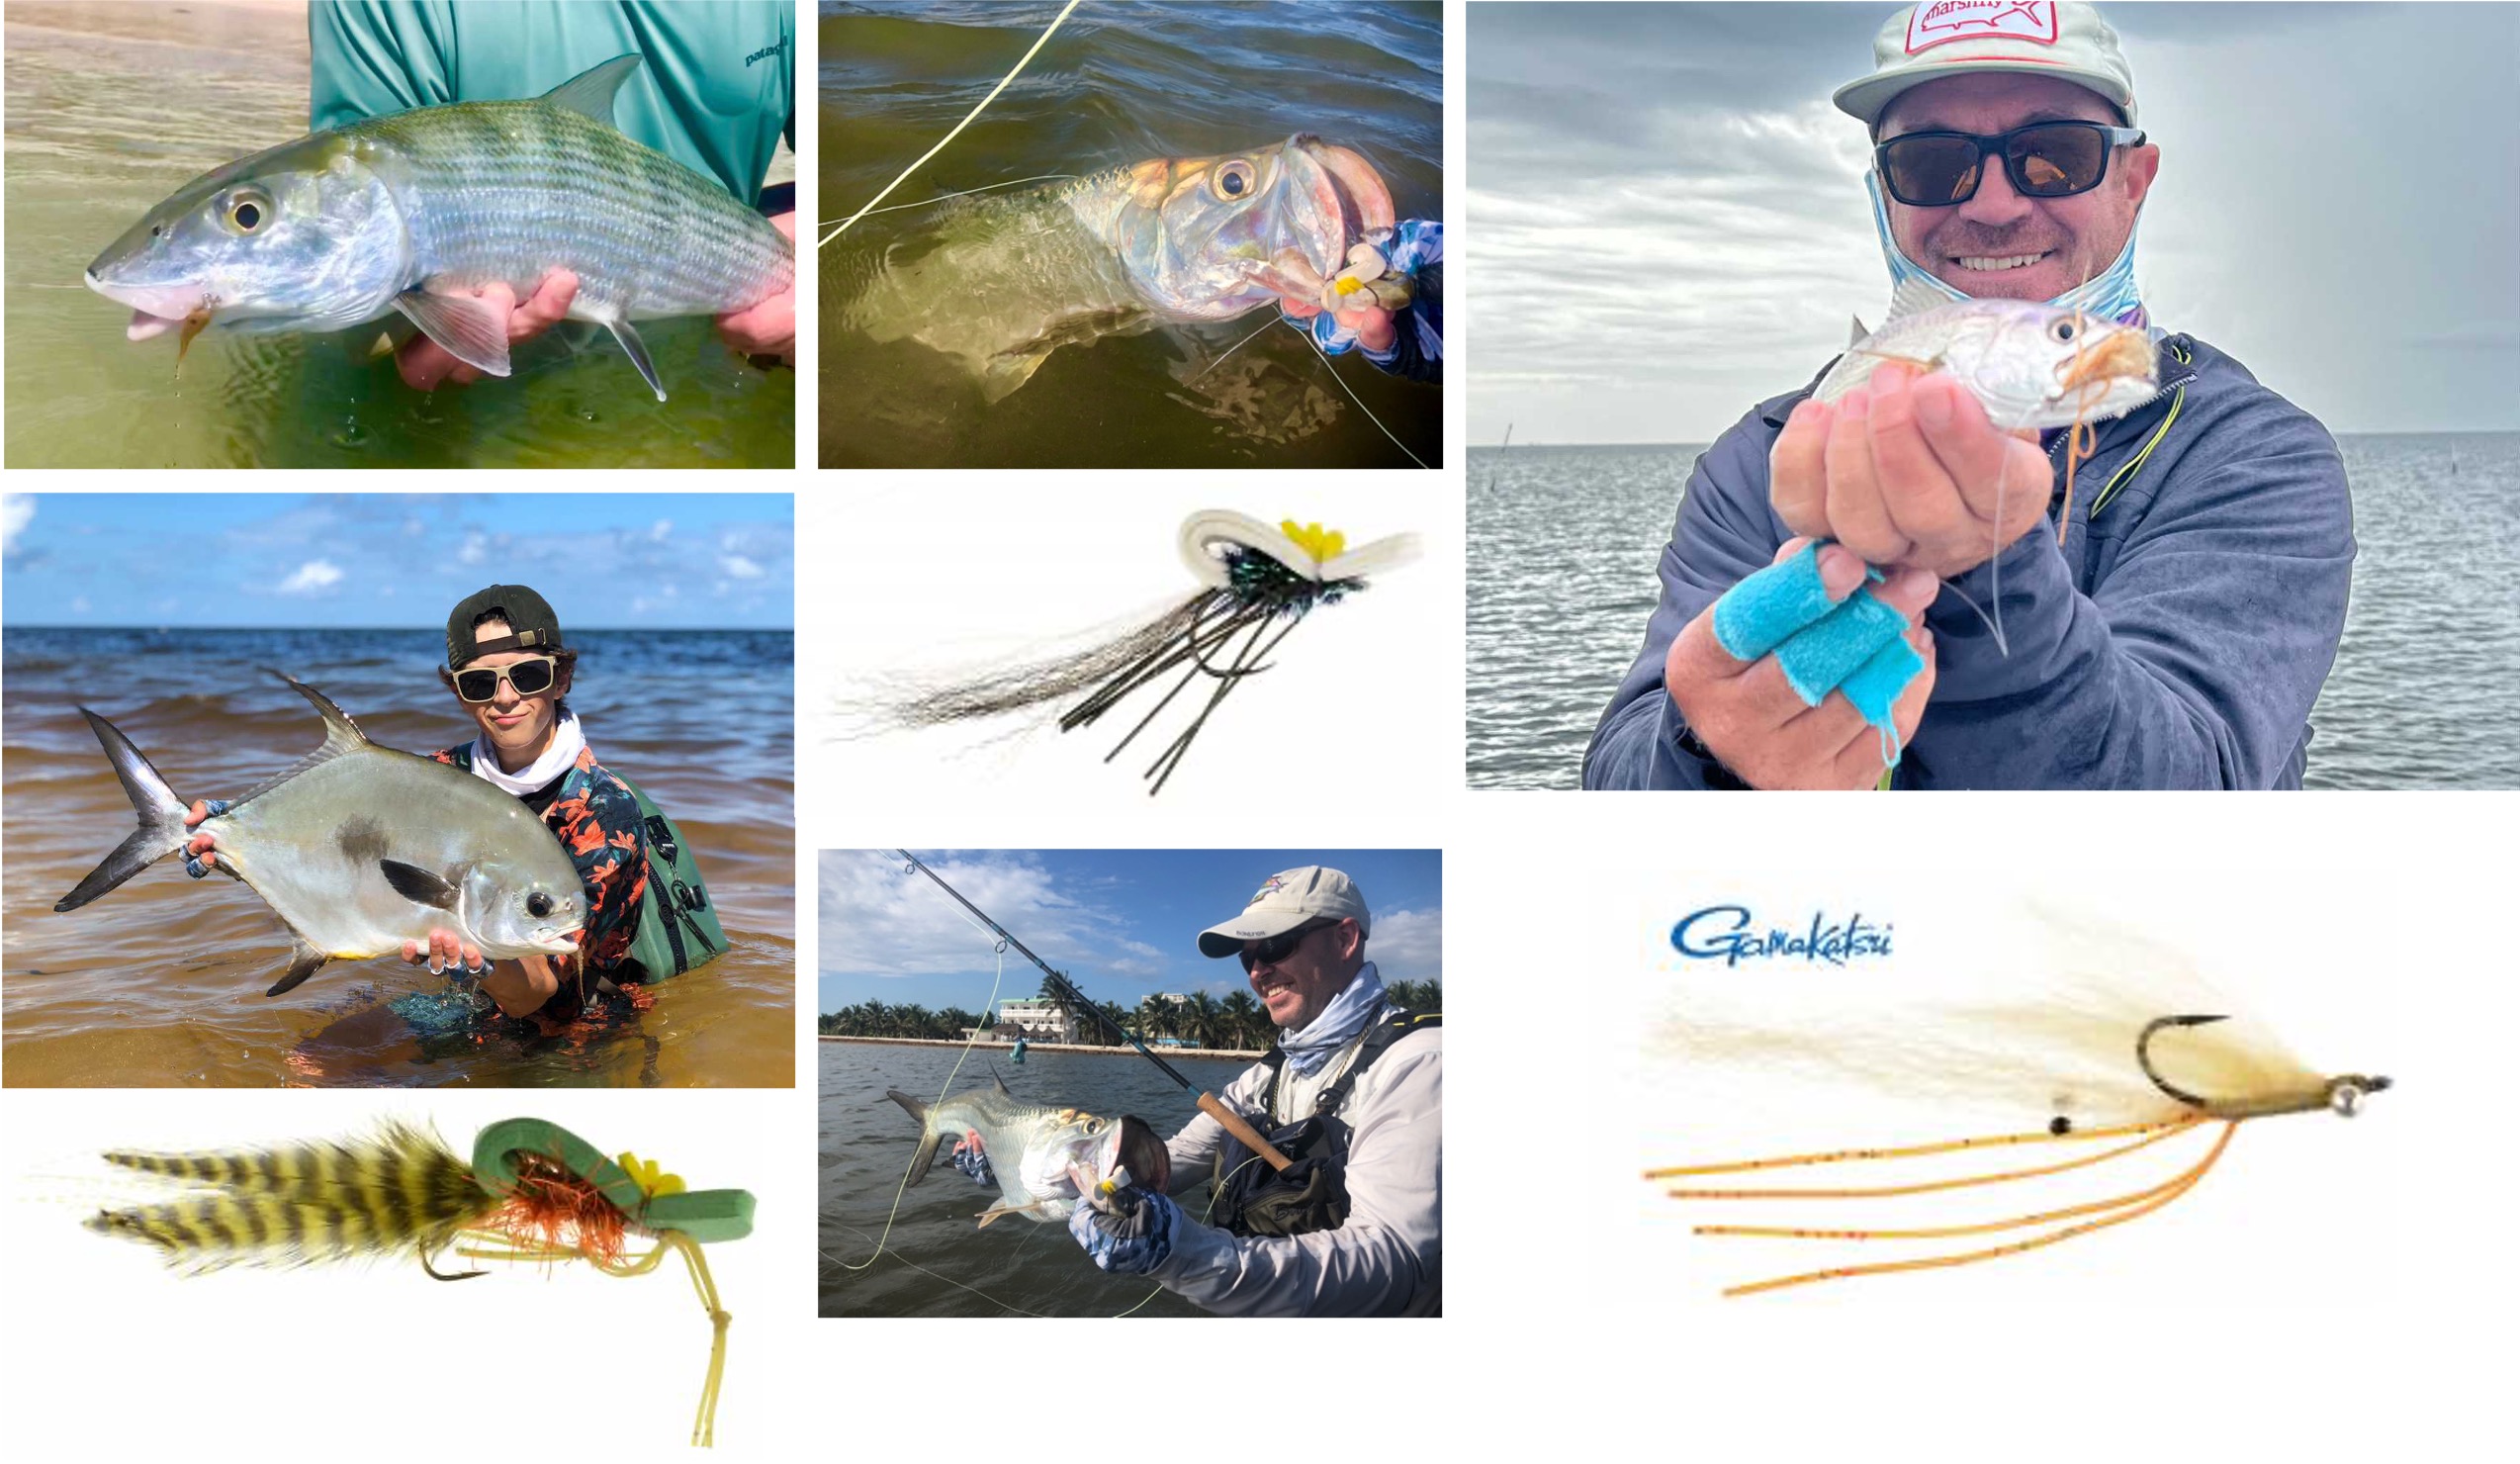 Fly Fishing for Tarpon, Bonefish, Permit, and Snook: A Super Grand